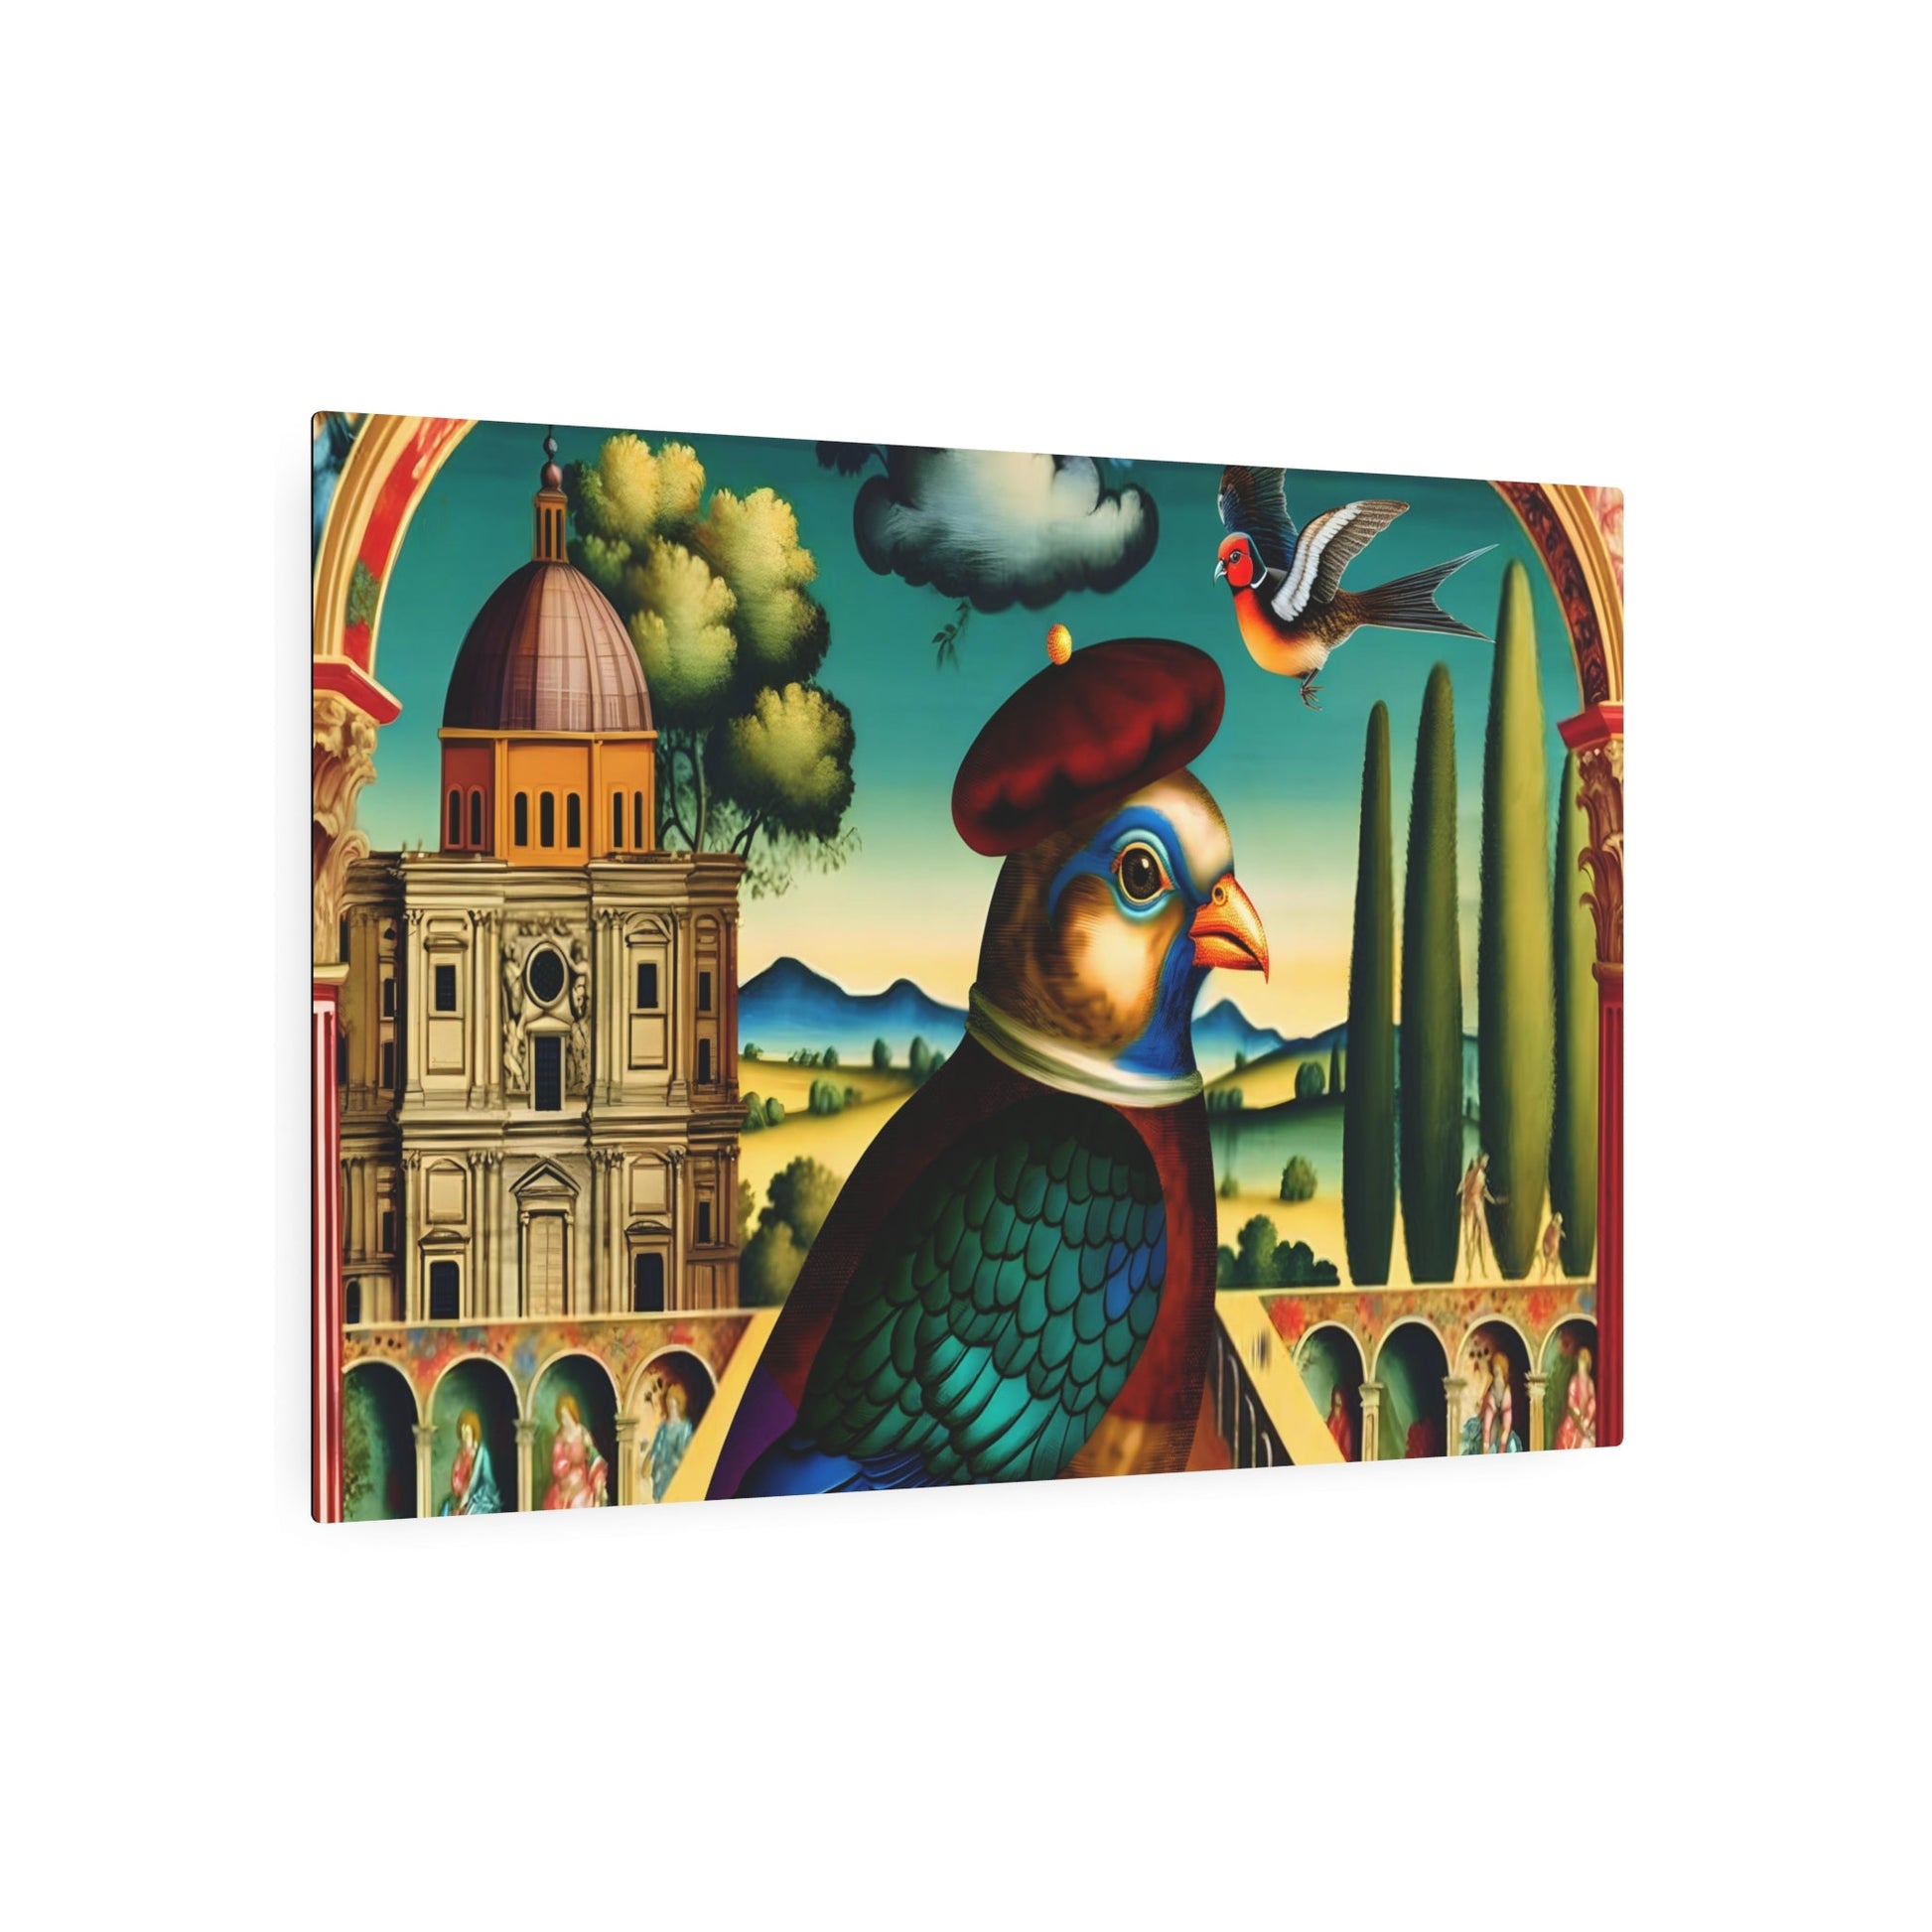 Metal Poster Art | "Renaissance Bird Artwork: Intricately Detailed & Colorful Painting with Rich Clothing, Landscapes, Luminous Skies & - Metal Poster Art 36″ x 24″ (Horizontal) 0.12''